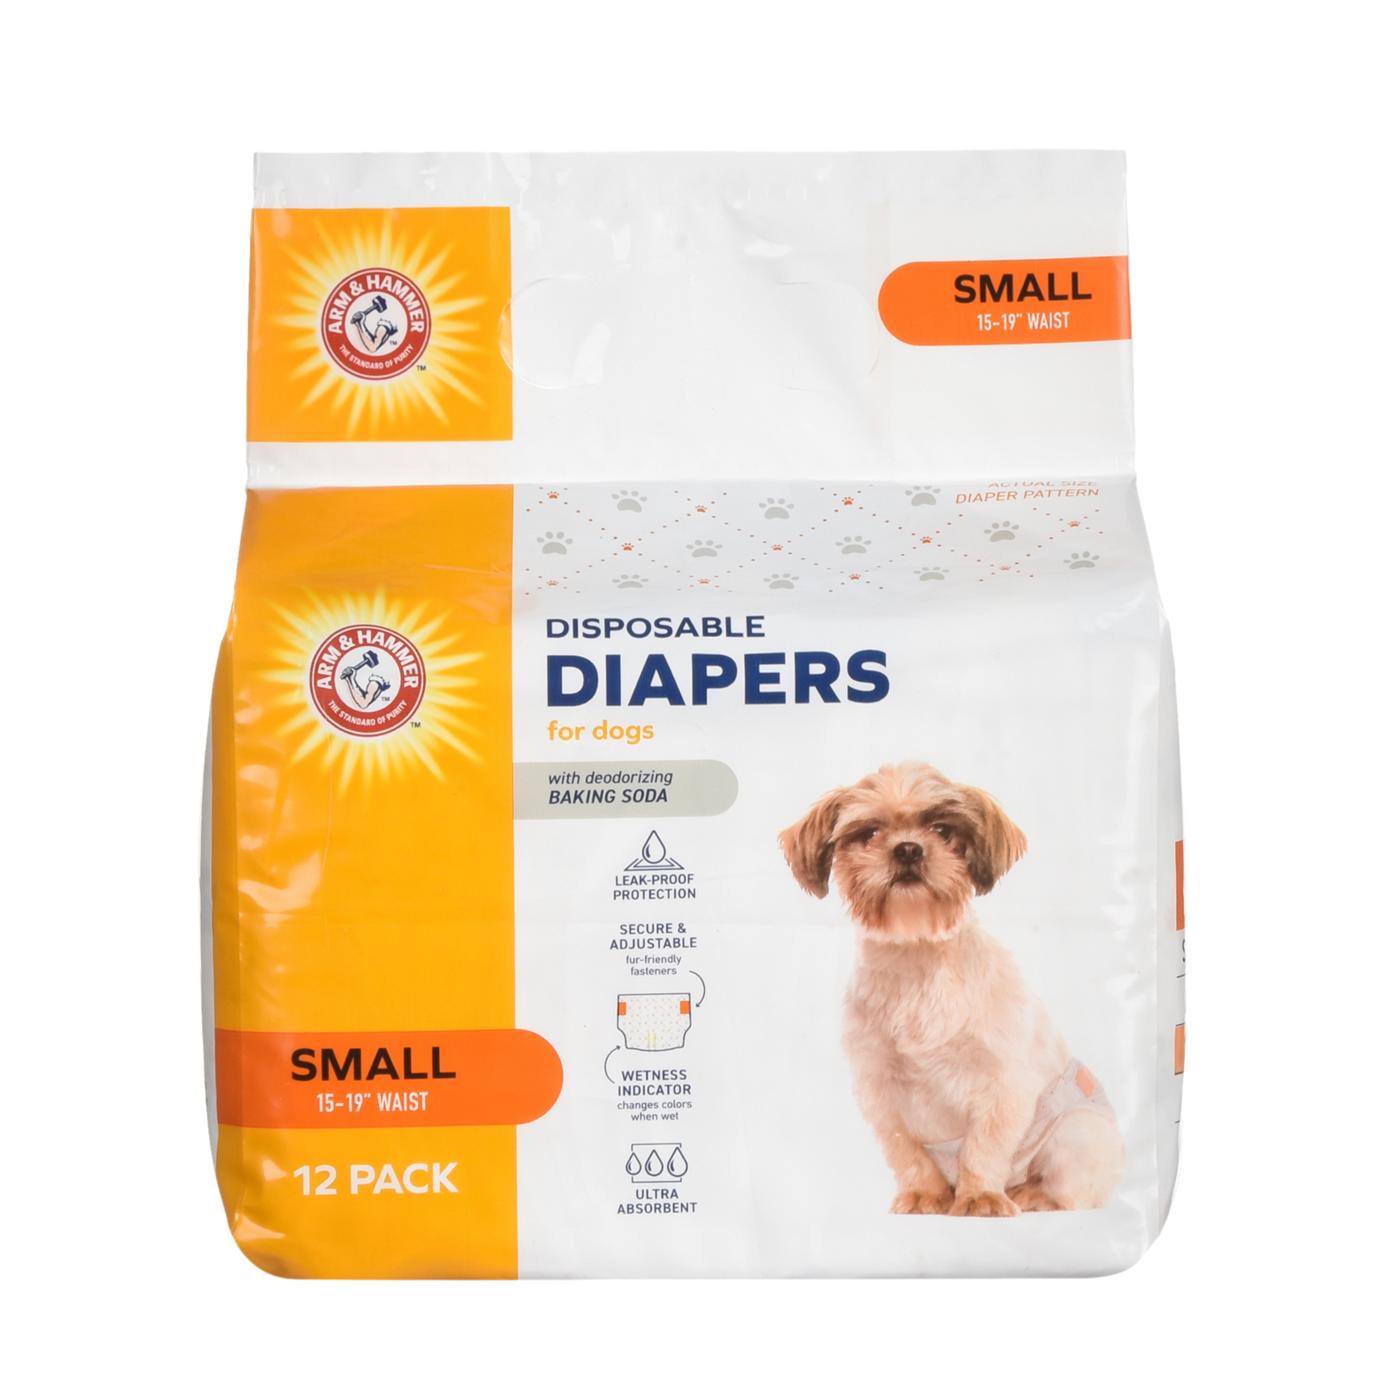 Arm & Hammer Disposable Dog Diapers - Small; image 1 of 3